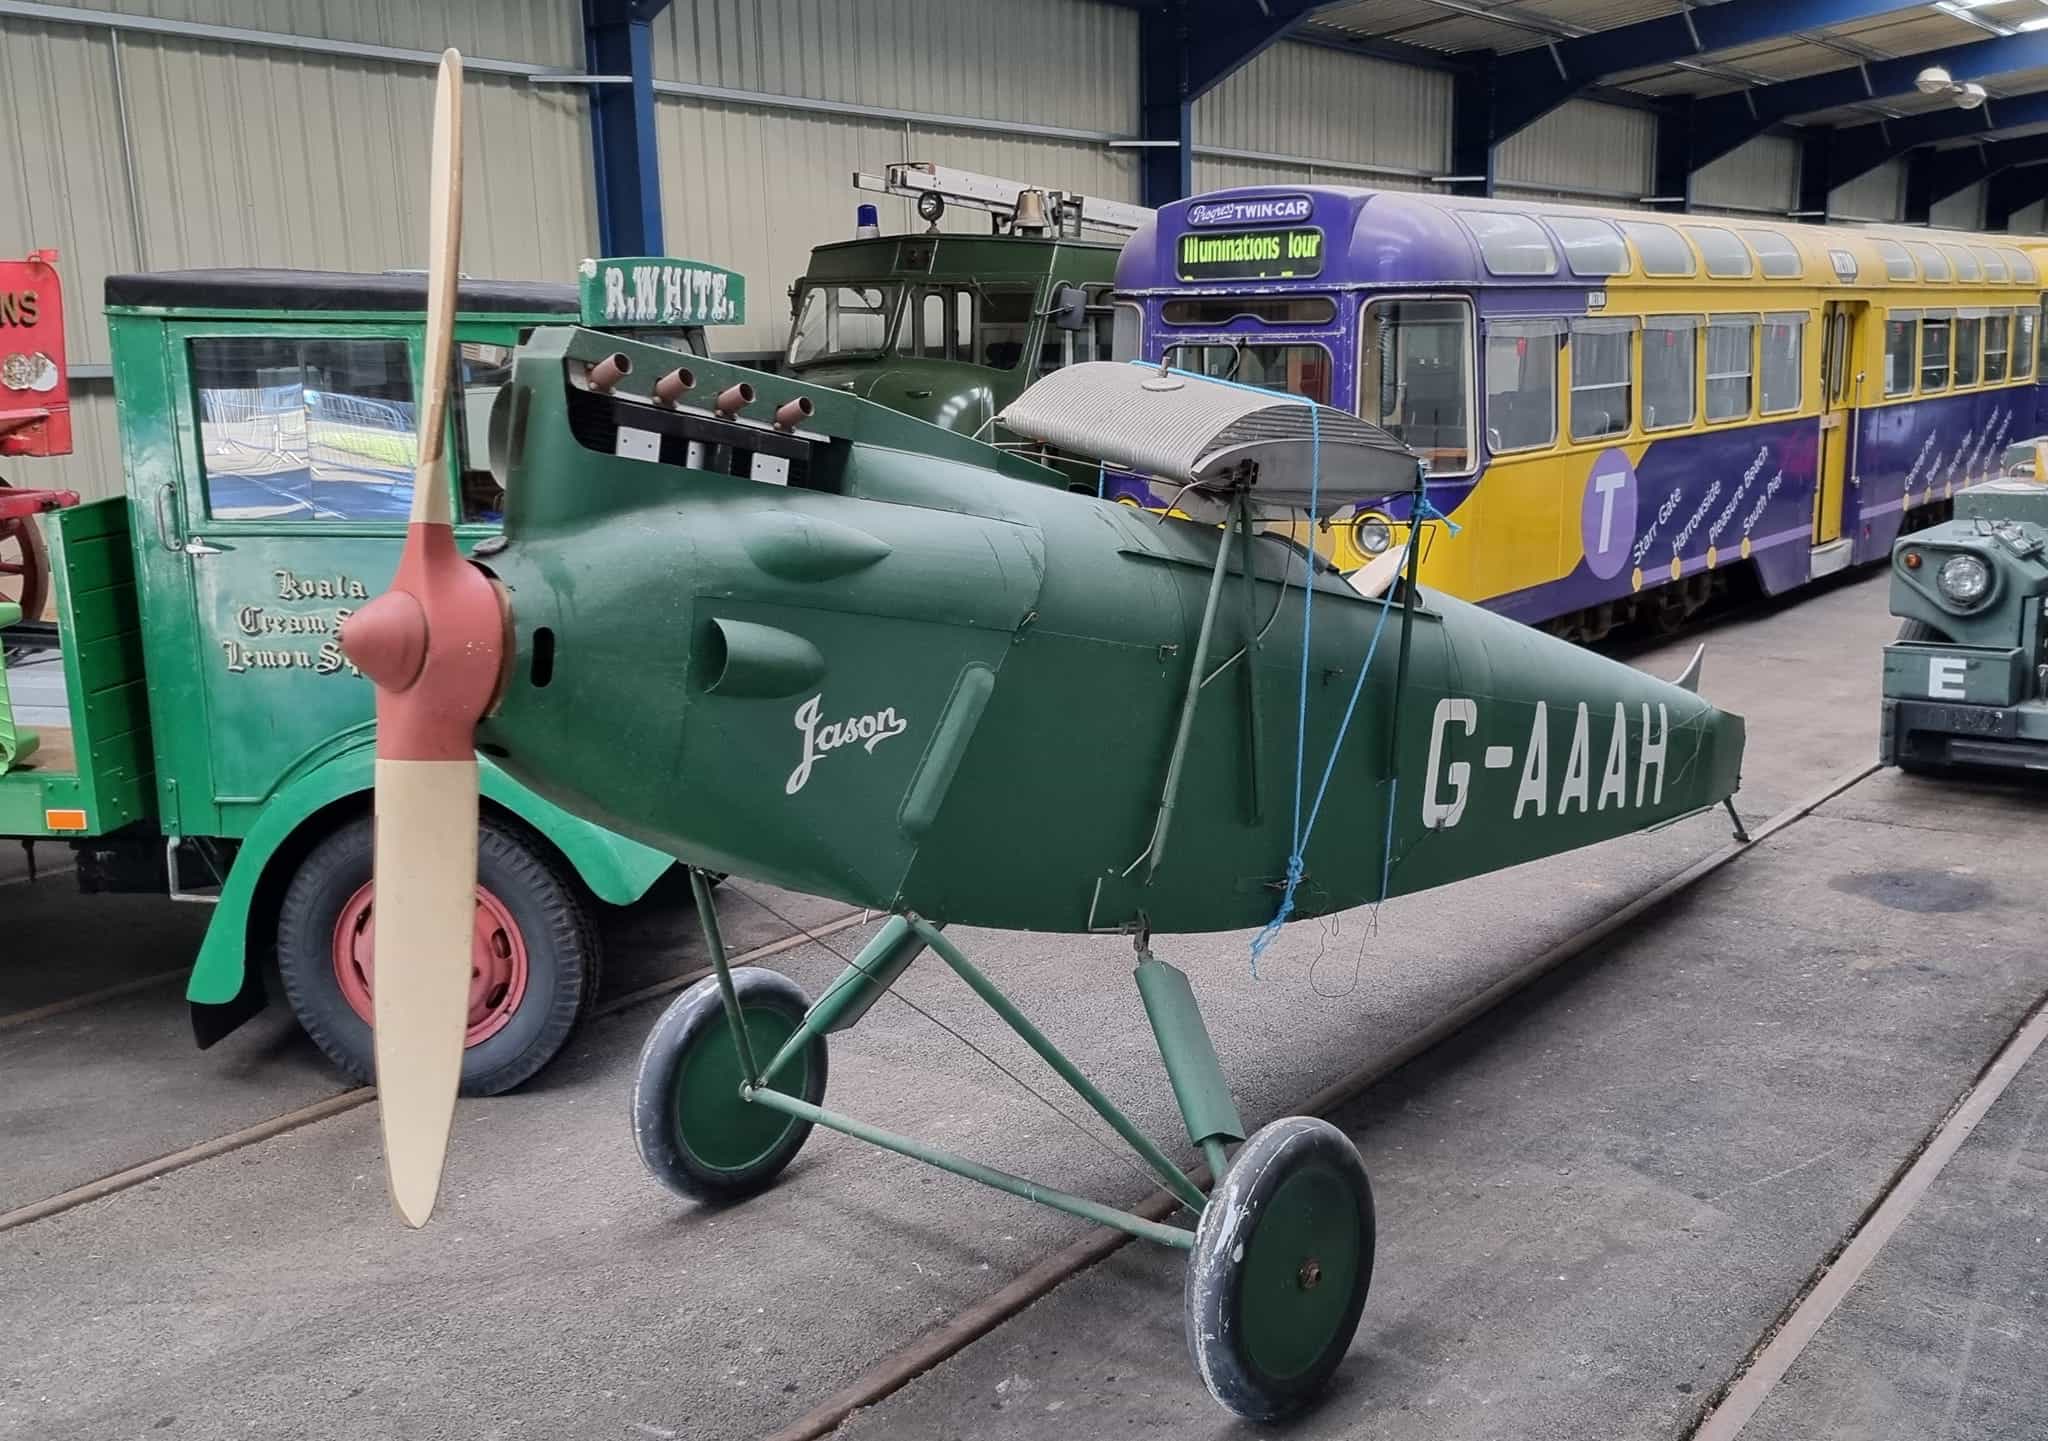 Replica DH Moth arriving at NELSAM